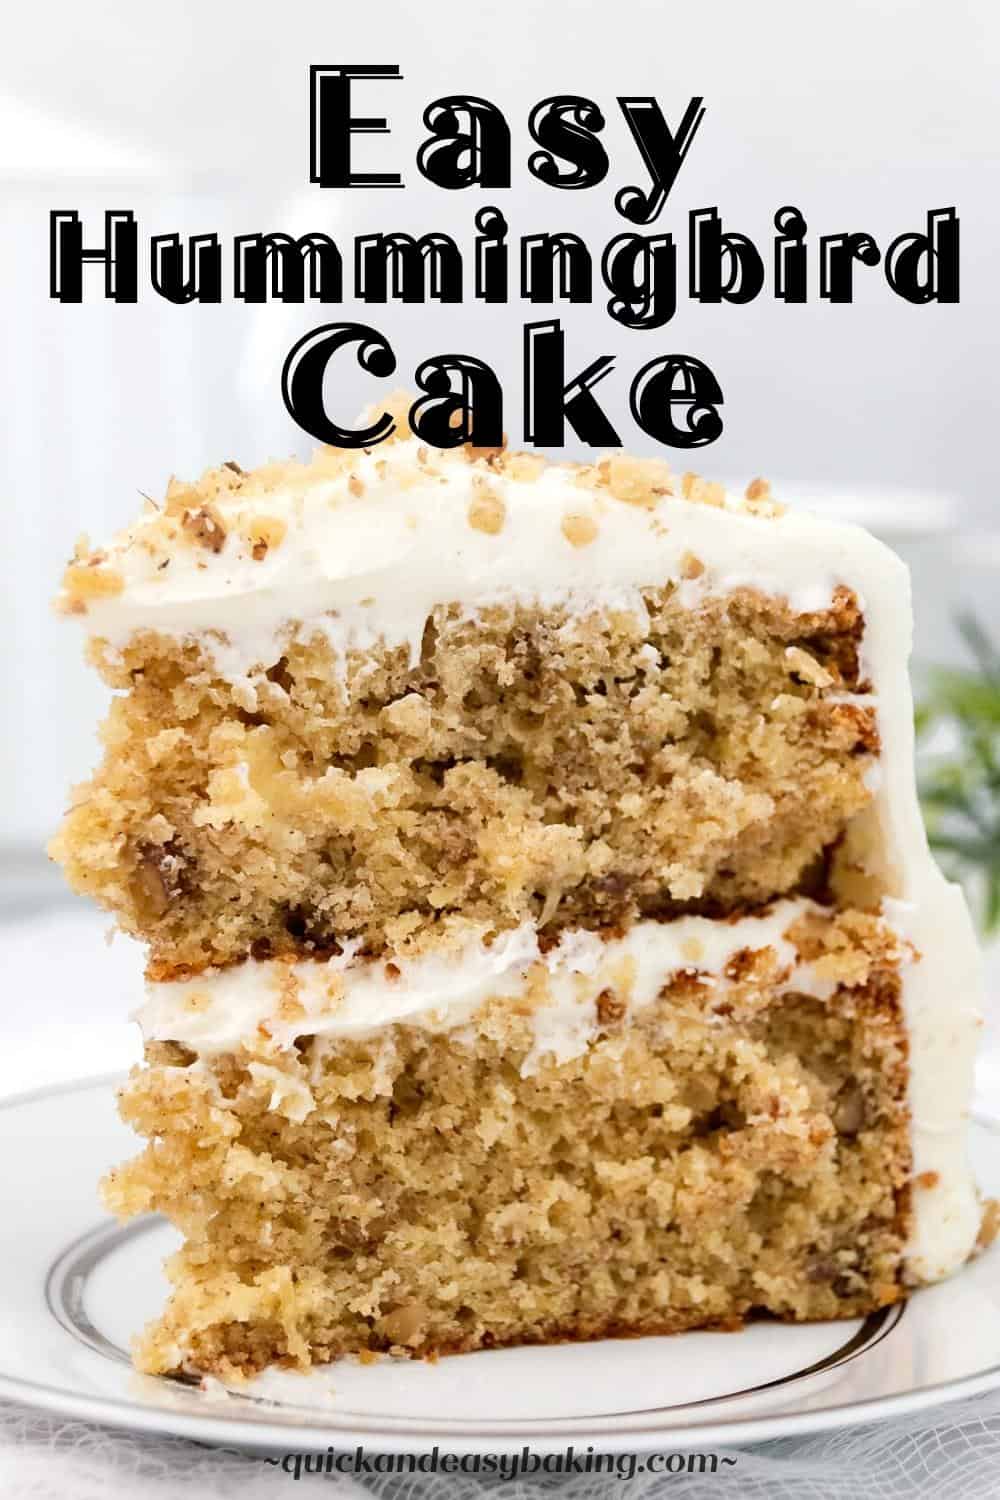 Hummingbird cake slice on a plate with text for a pin image.